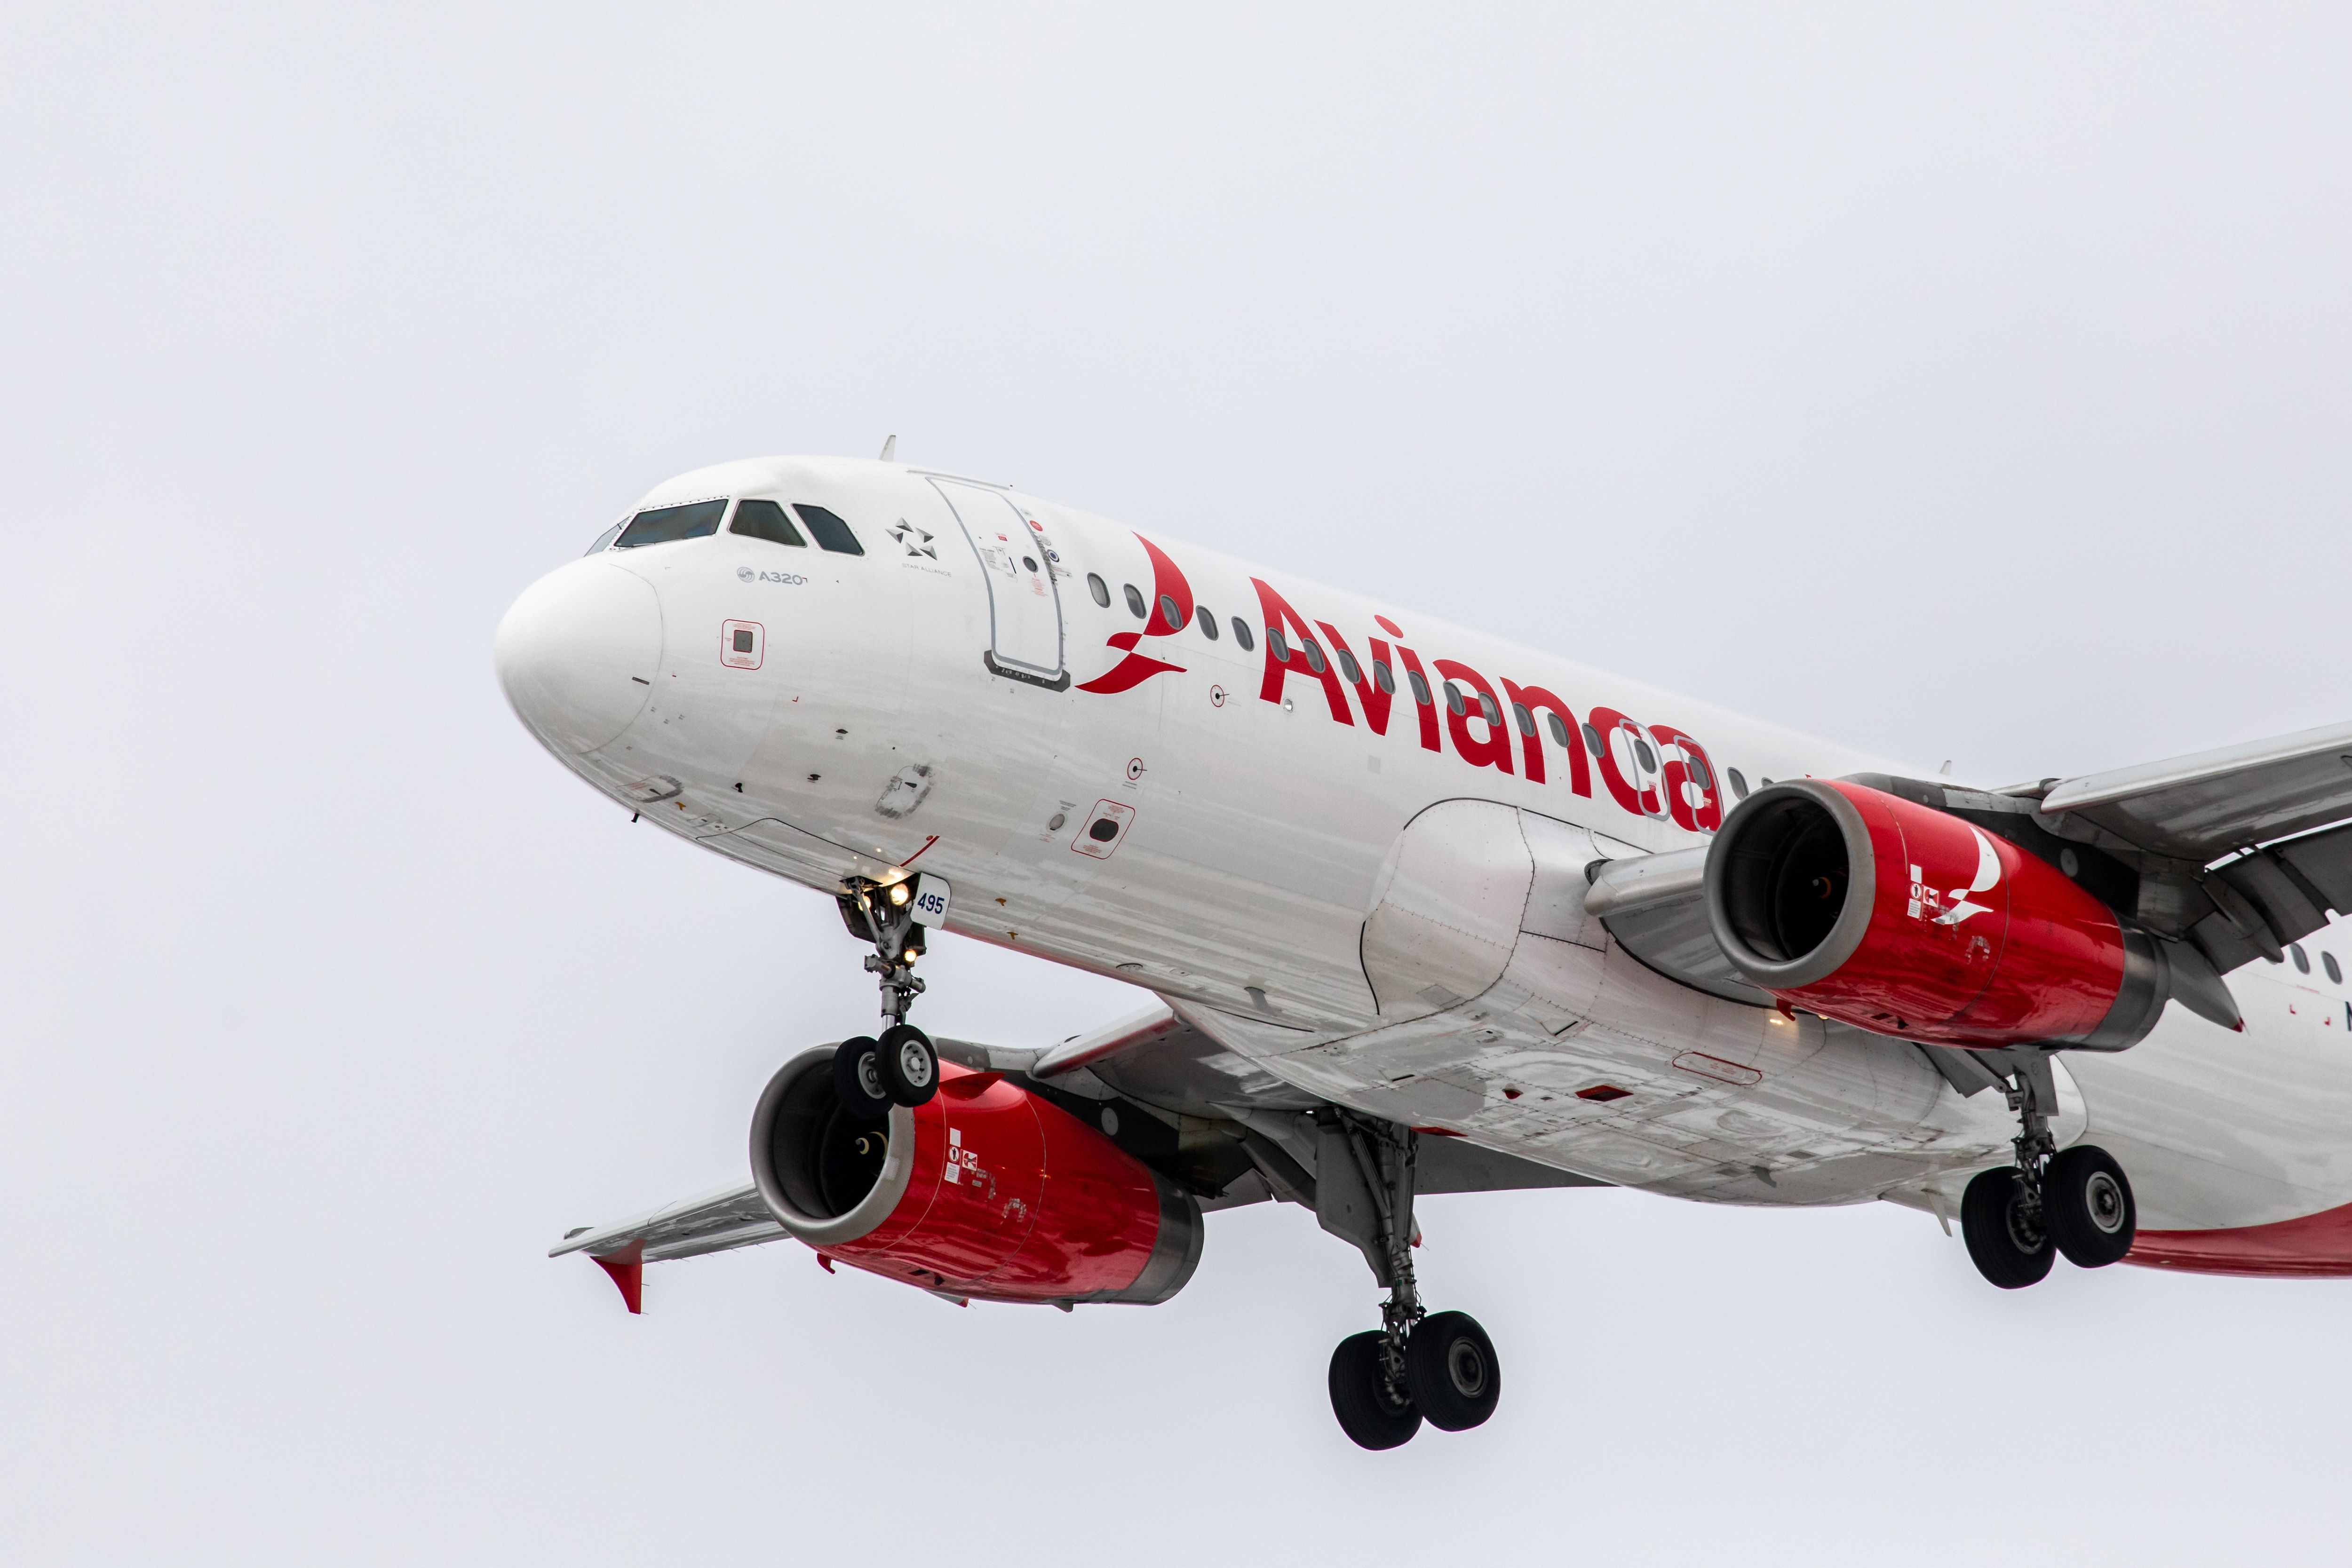 An Avianca aircraft flying in the sky.